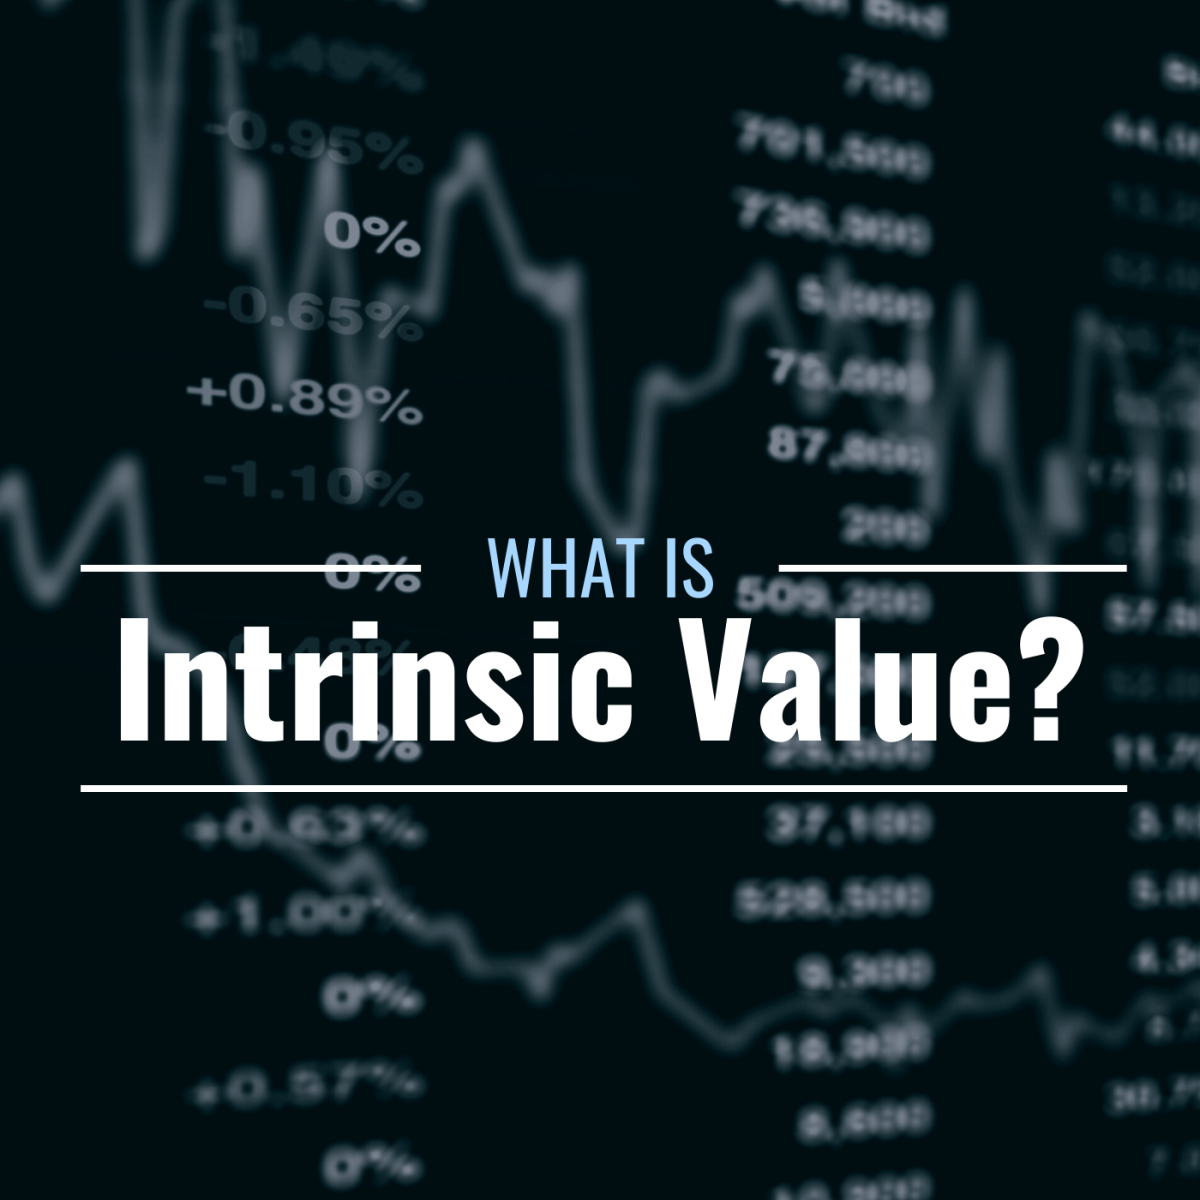 Stock market chart with text overlay: "What Is Intrinsic Value?"